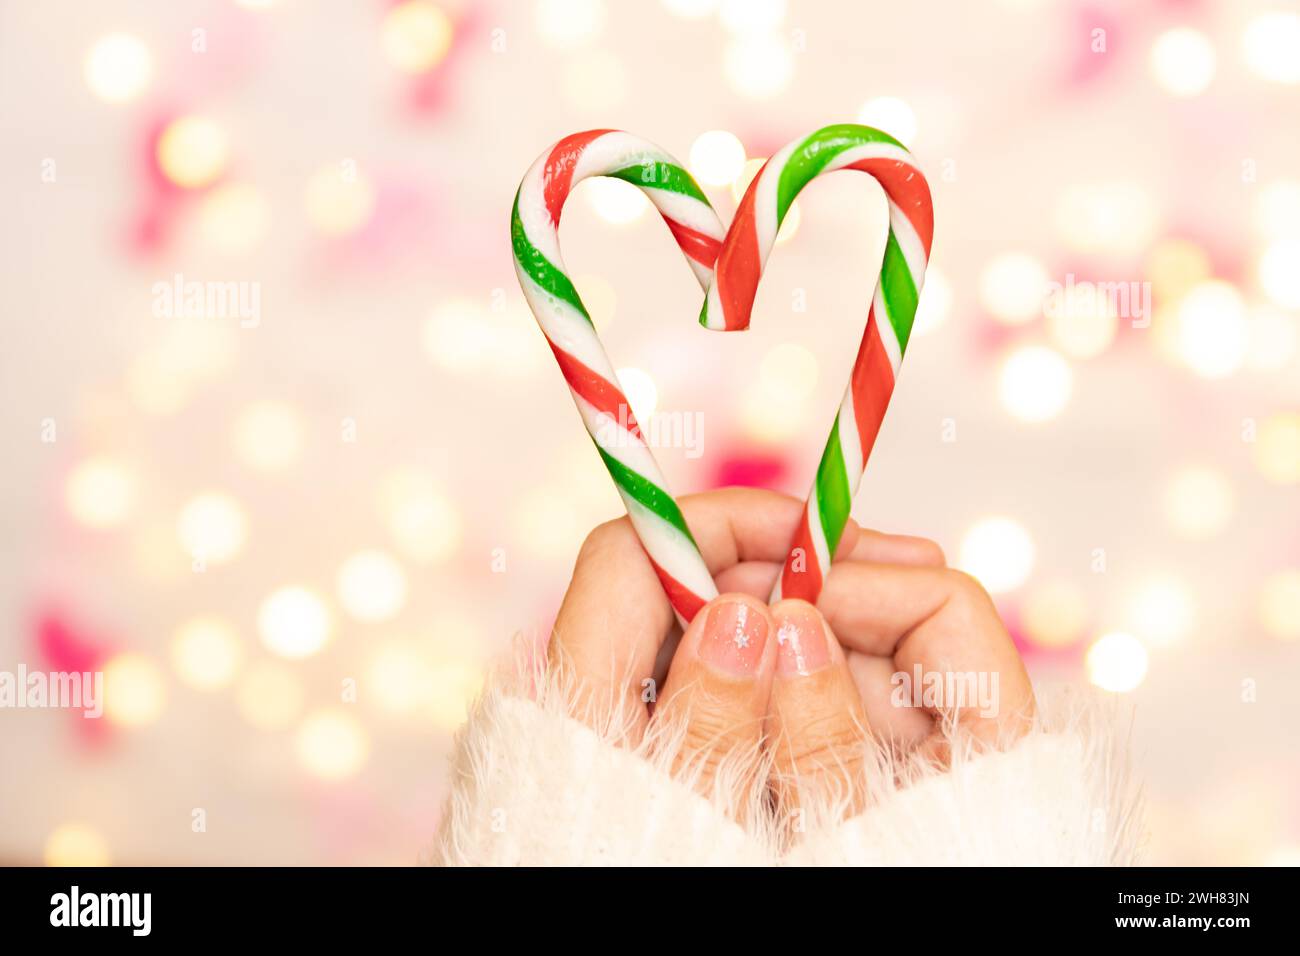 woman hand with sweater holding candy canes in the shape of heart, defocus bokeh light decorate for Valentine's Day celebration at background. Stock Photo